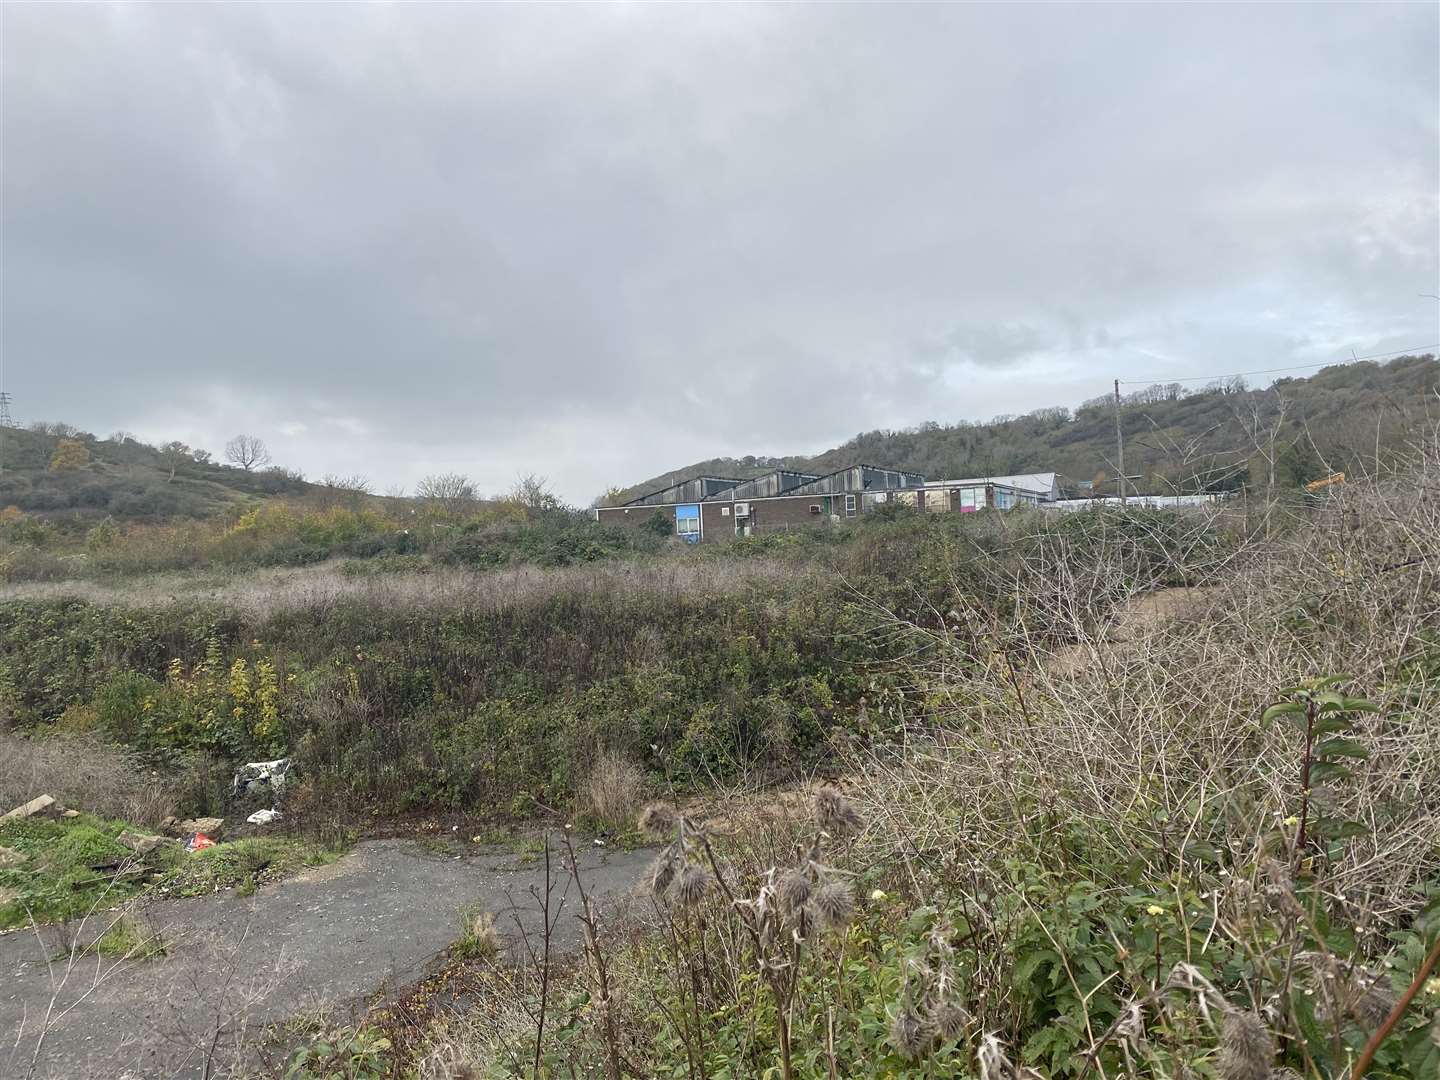 137 new homes could be built on wasteland in Barwick Road in Dover if plans are approved